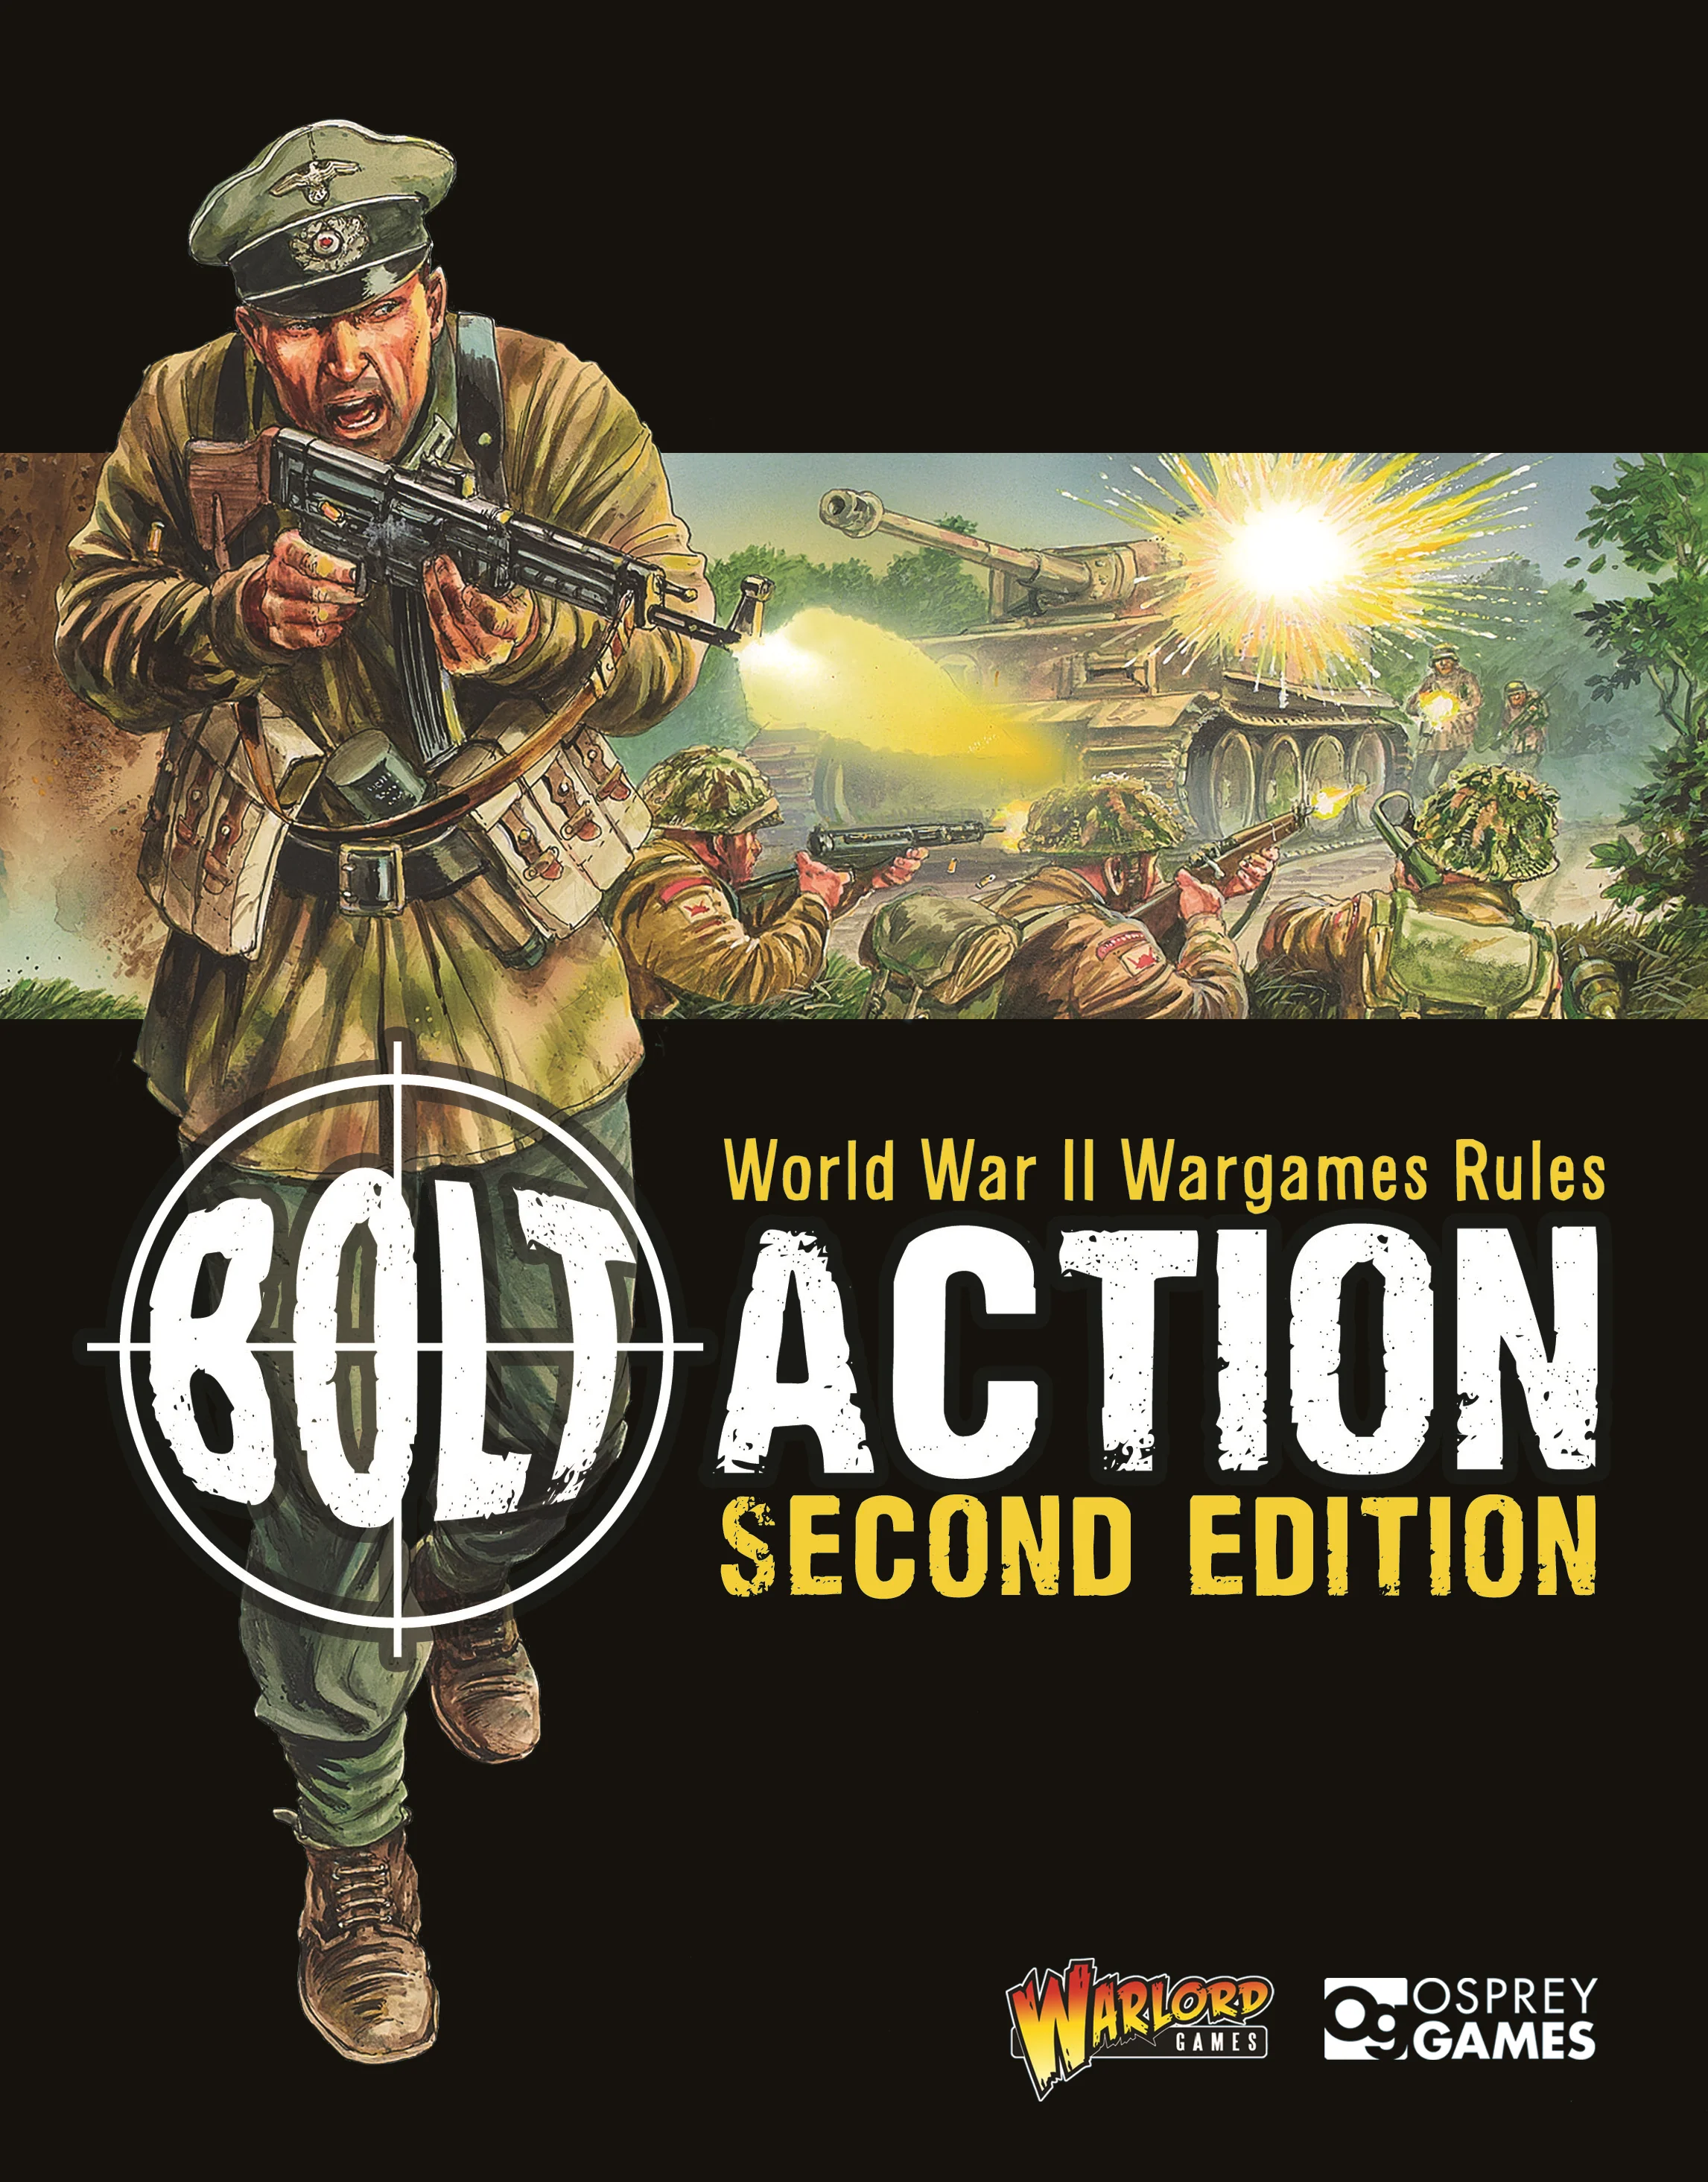 BOLT ACTION SECOND EDITION RULEBOOK